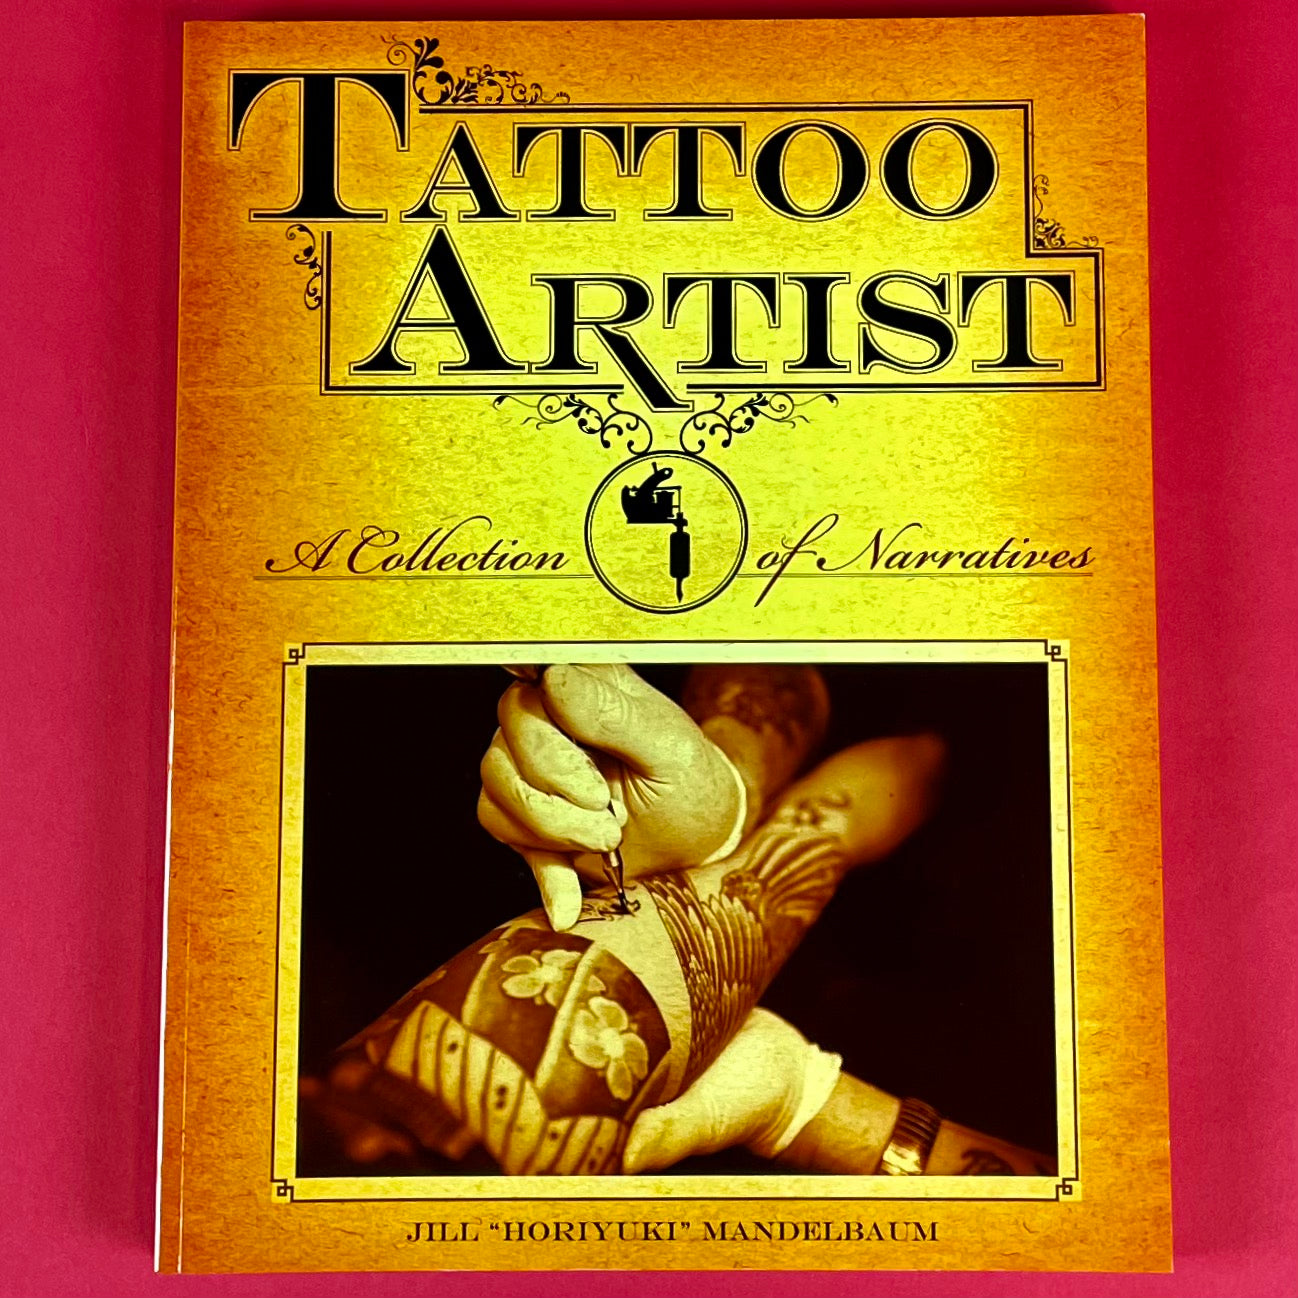 Tattoo Artist: A Collection of Narratives